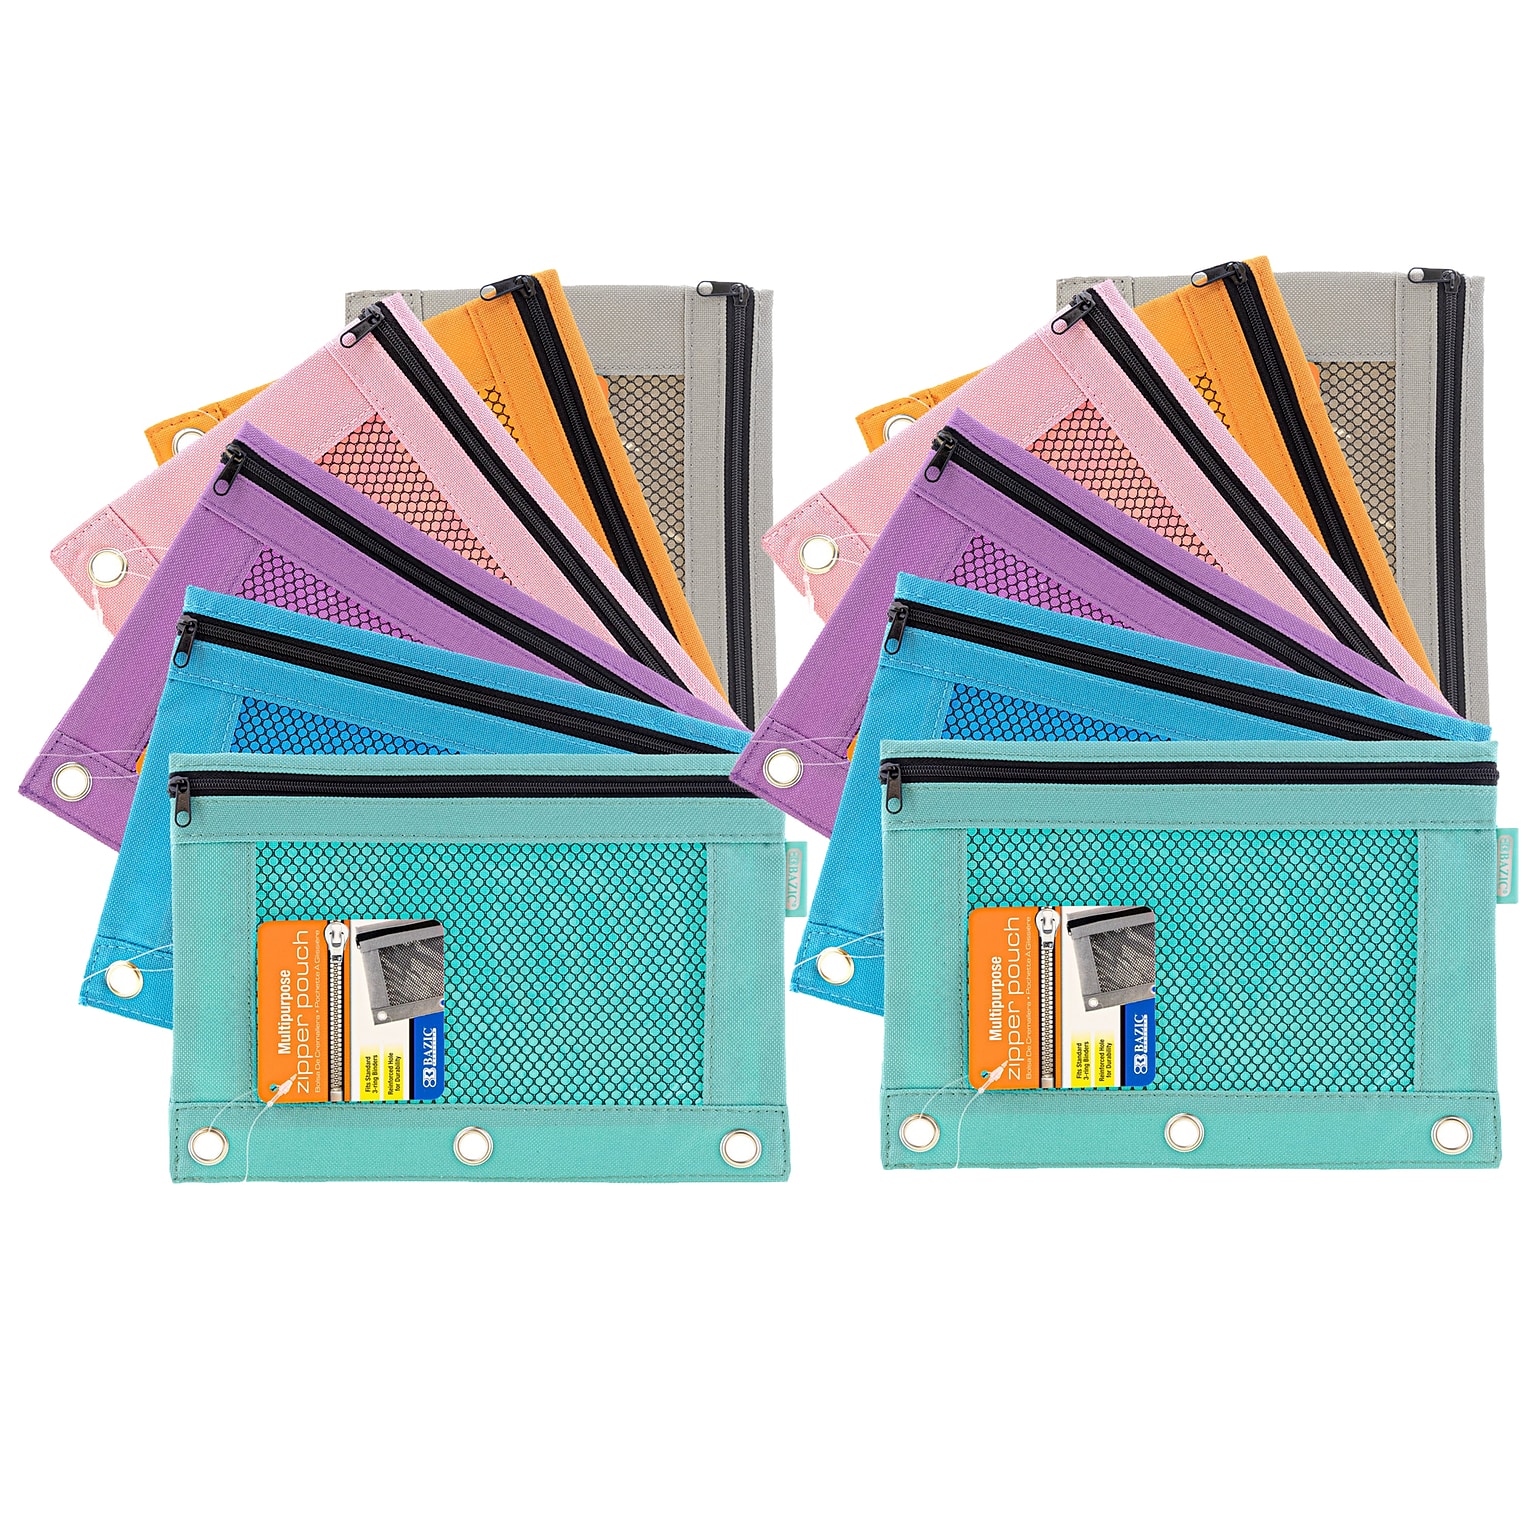 BAZIC Products Zip Polyester 3-Ring Pencil Pouch with Mesh Window, Assorted Retro Pastel Colors, Pack of 12 (BAZ810-12)